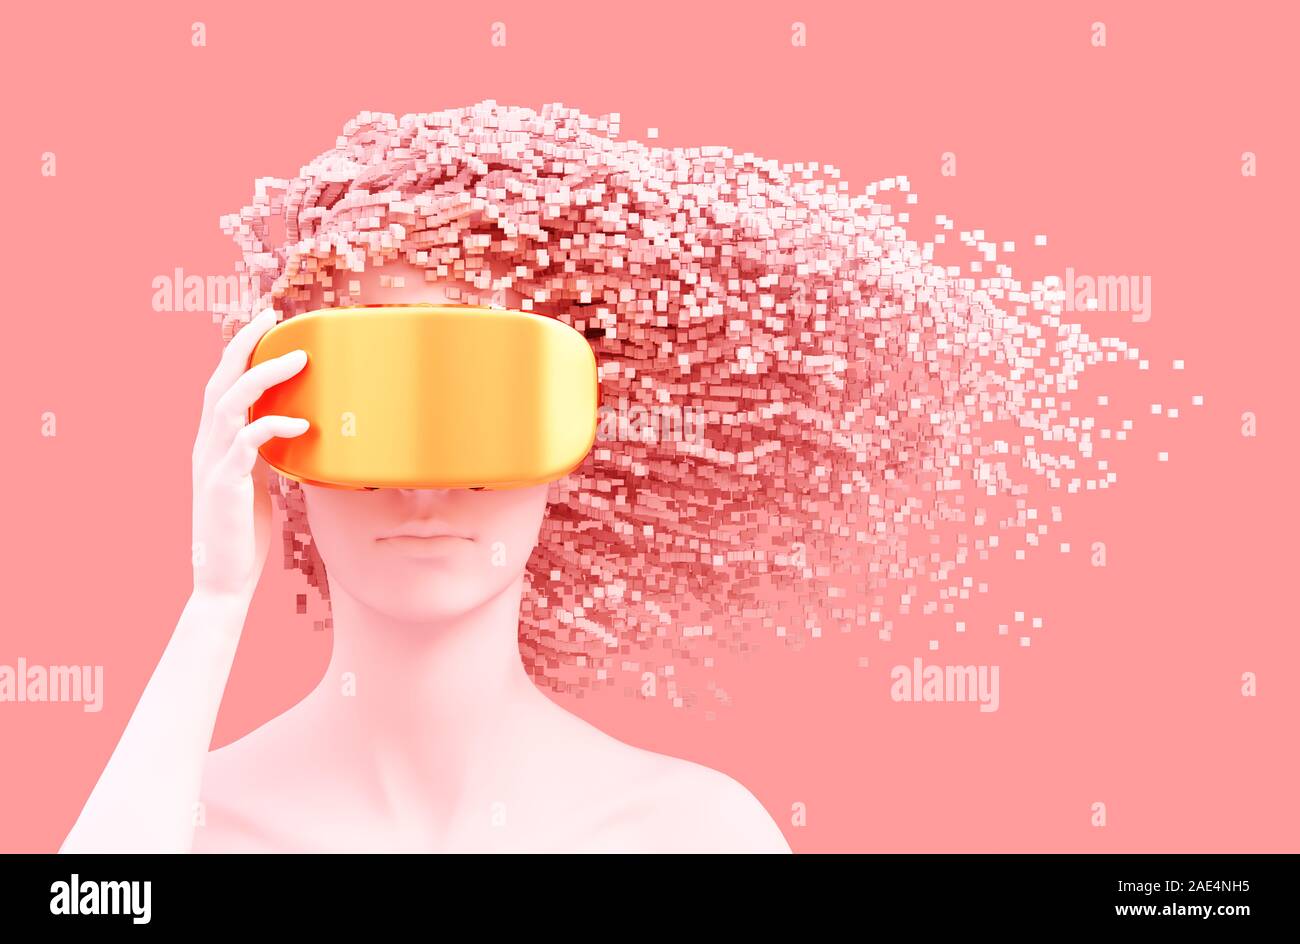 Beautiful Woman Wearing Gold VR Glasses And 3D Pixels As Hair On Pink Background. Virtual Reality Concept. Stock Photo